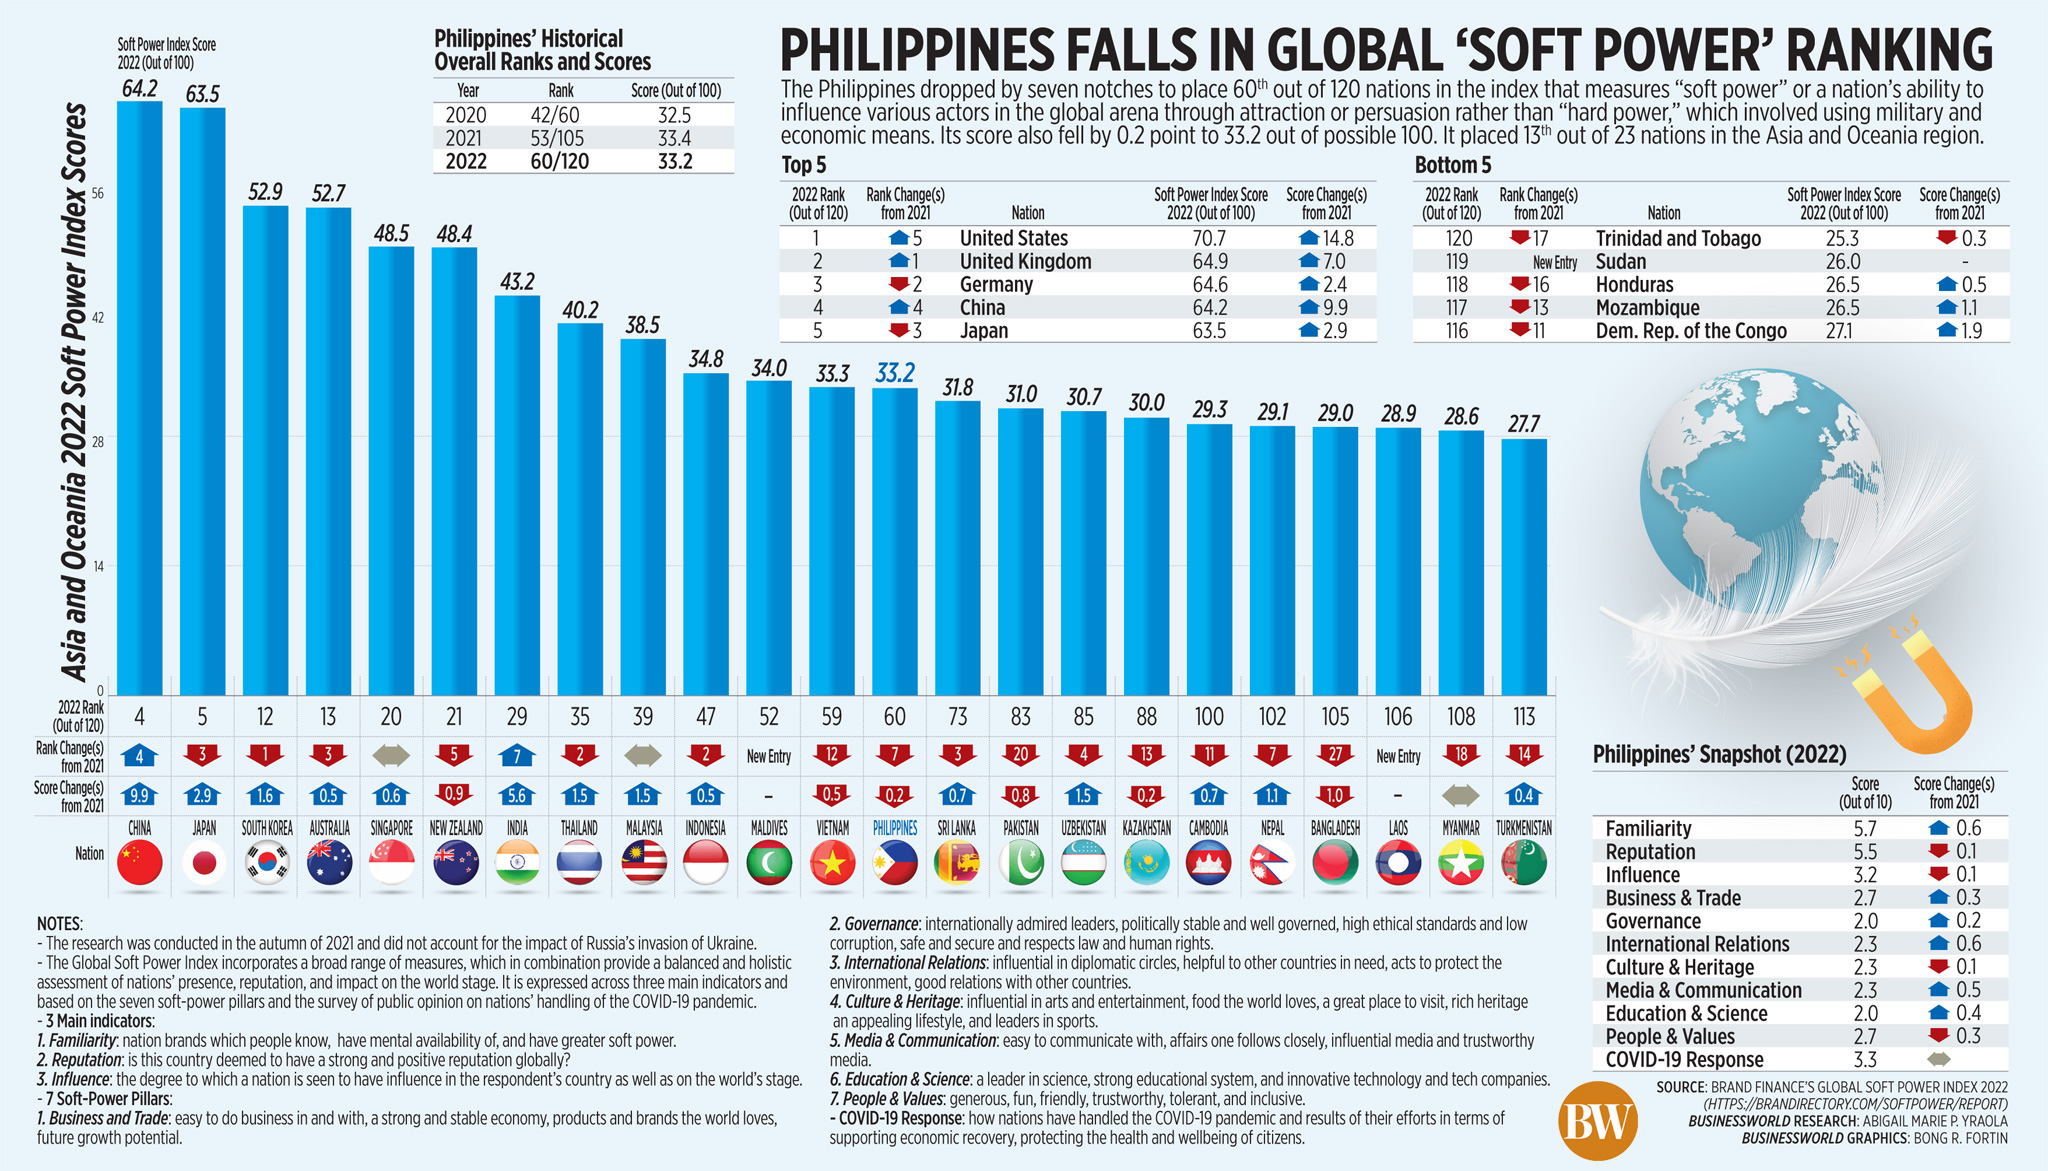 Philippines falls in global ‘soft power’ ranking